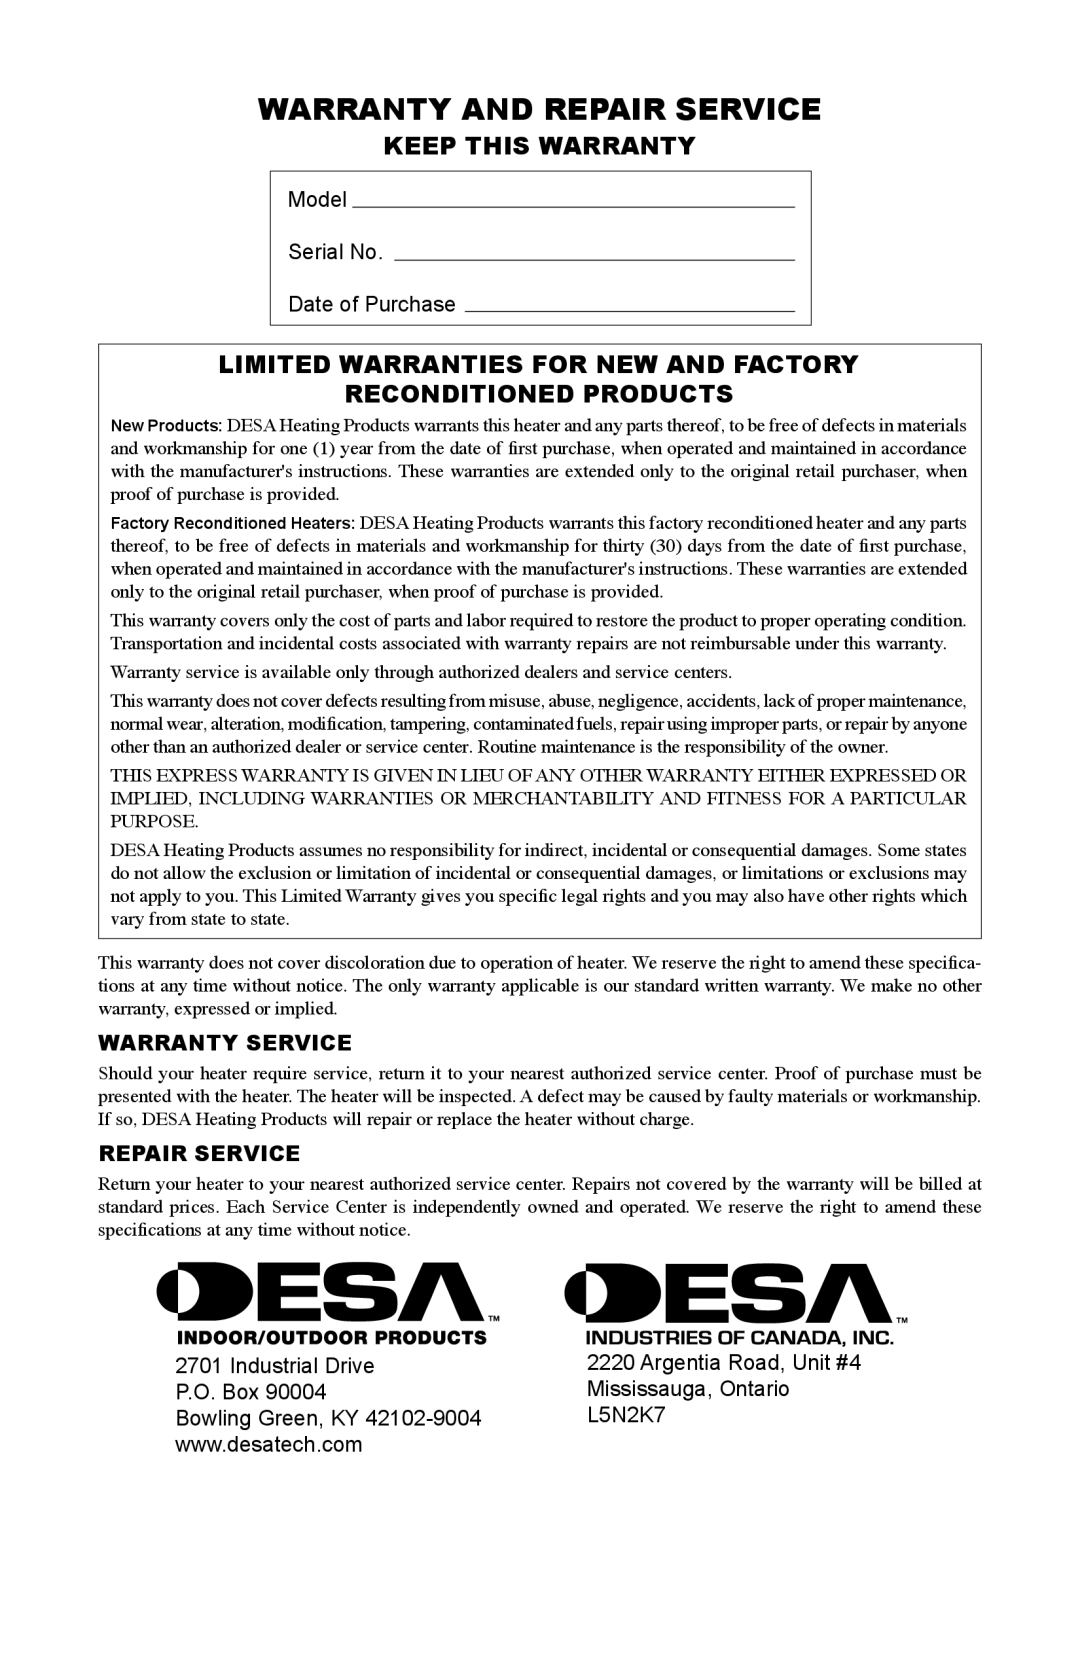 Desa Btu Warranty And Repair Service, Keep This Warranty, Limited Warranties For New And Factory, Reconditioned Products 